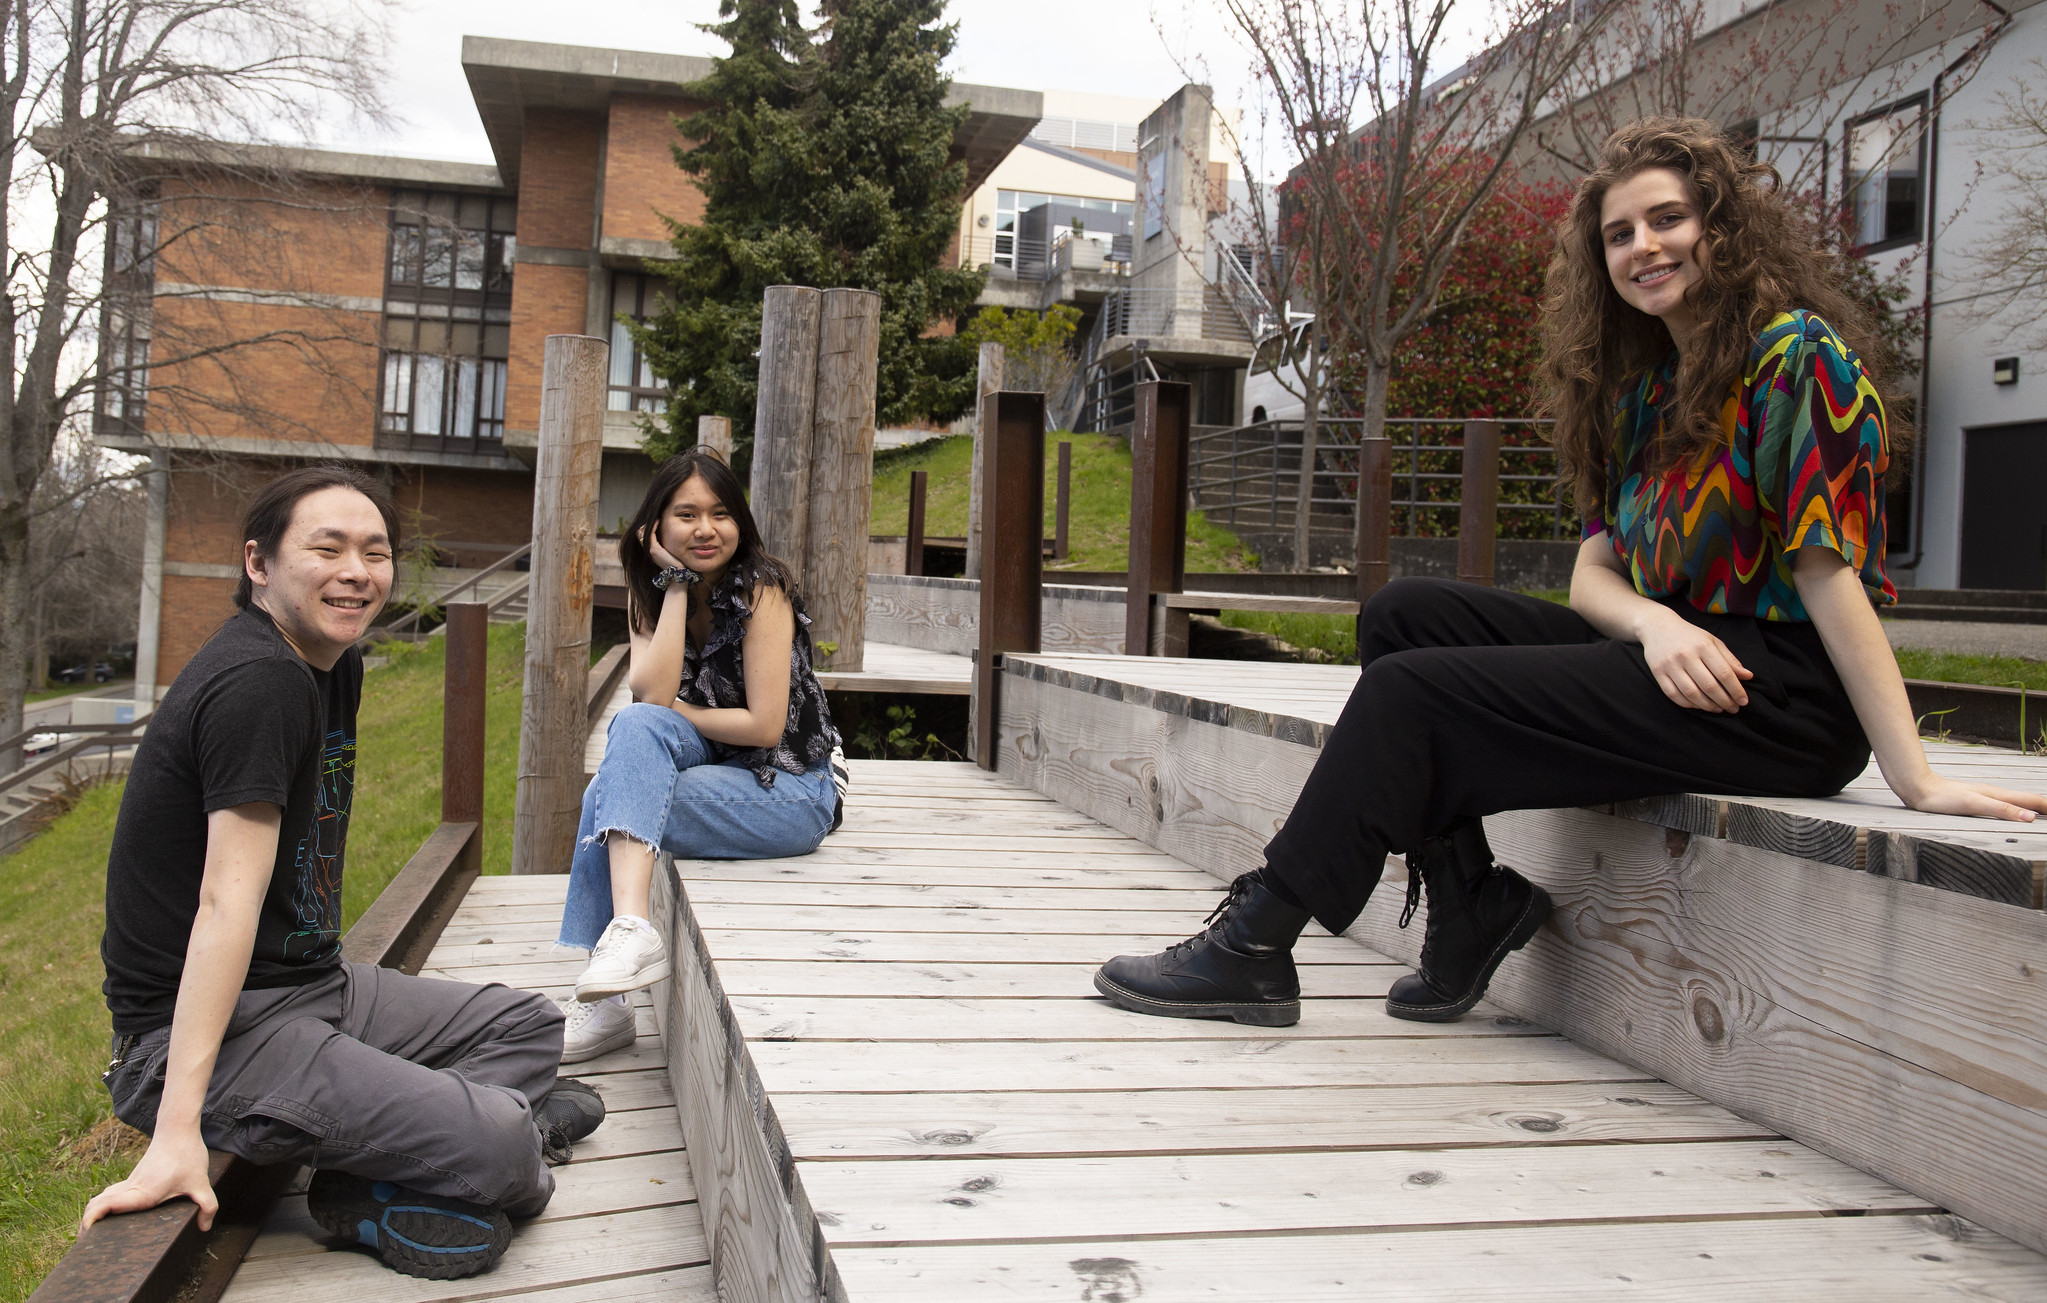 Three people sitting in an outdoor sitting area on campus